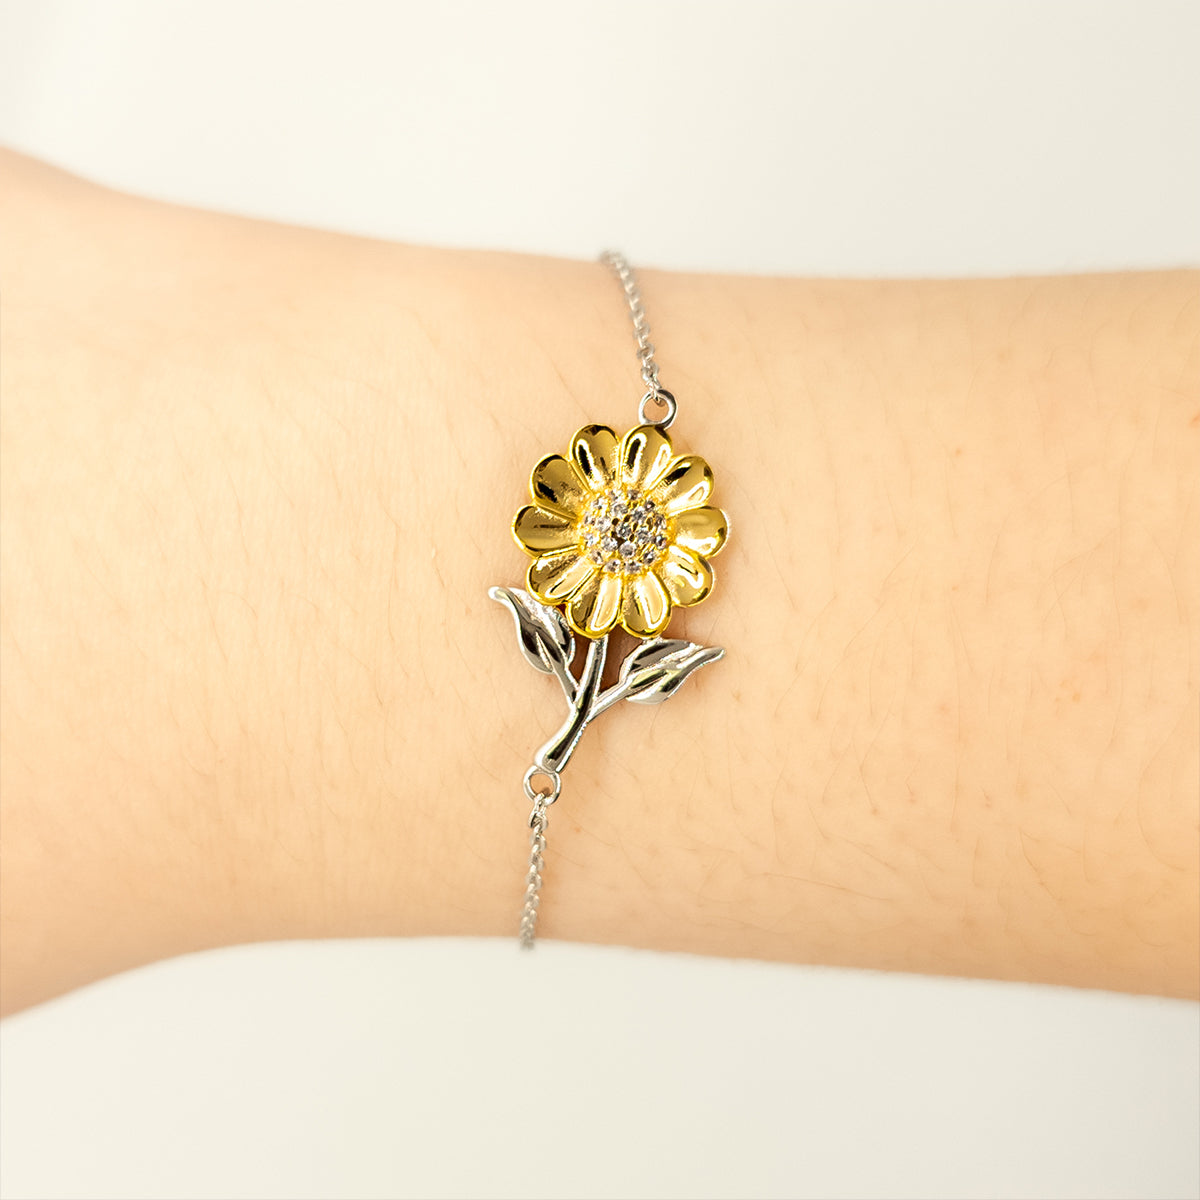 Bonus Dad Sunflower Bracelet - Youll always have a special place in my heart - Engraved Gift for Birthday, Christmas, Fathers Day - Unique and Inspirational Jewelry for Stepdad, Adoptive Father, Veterans